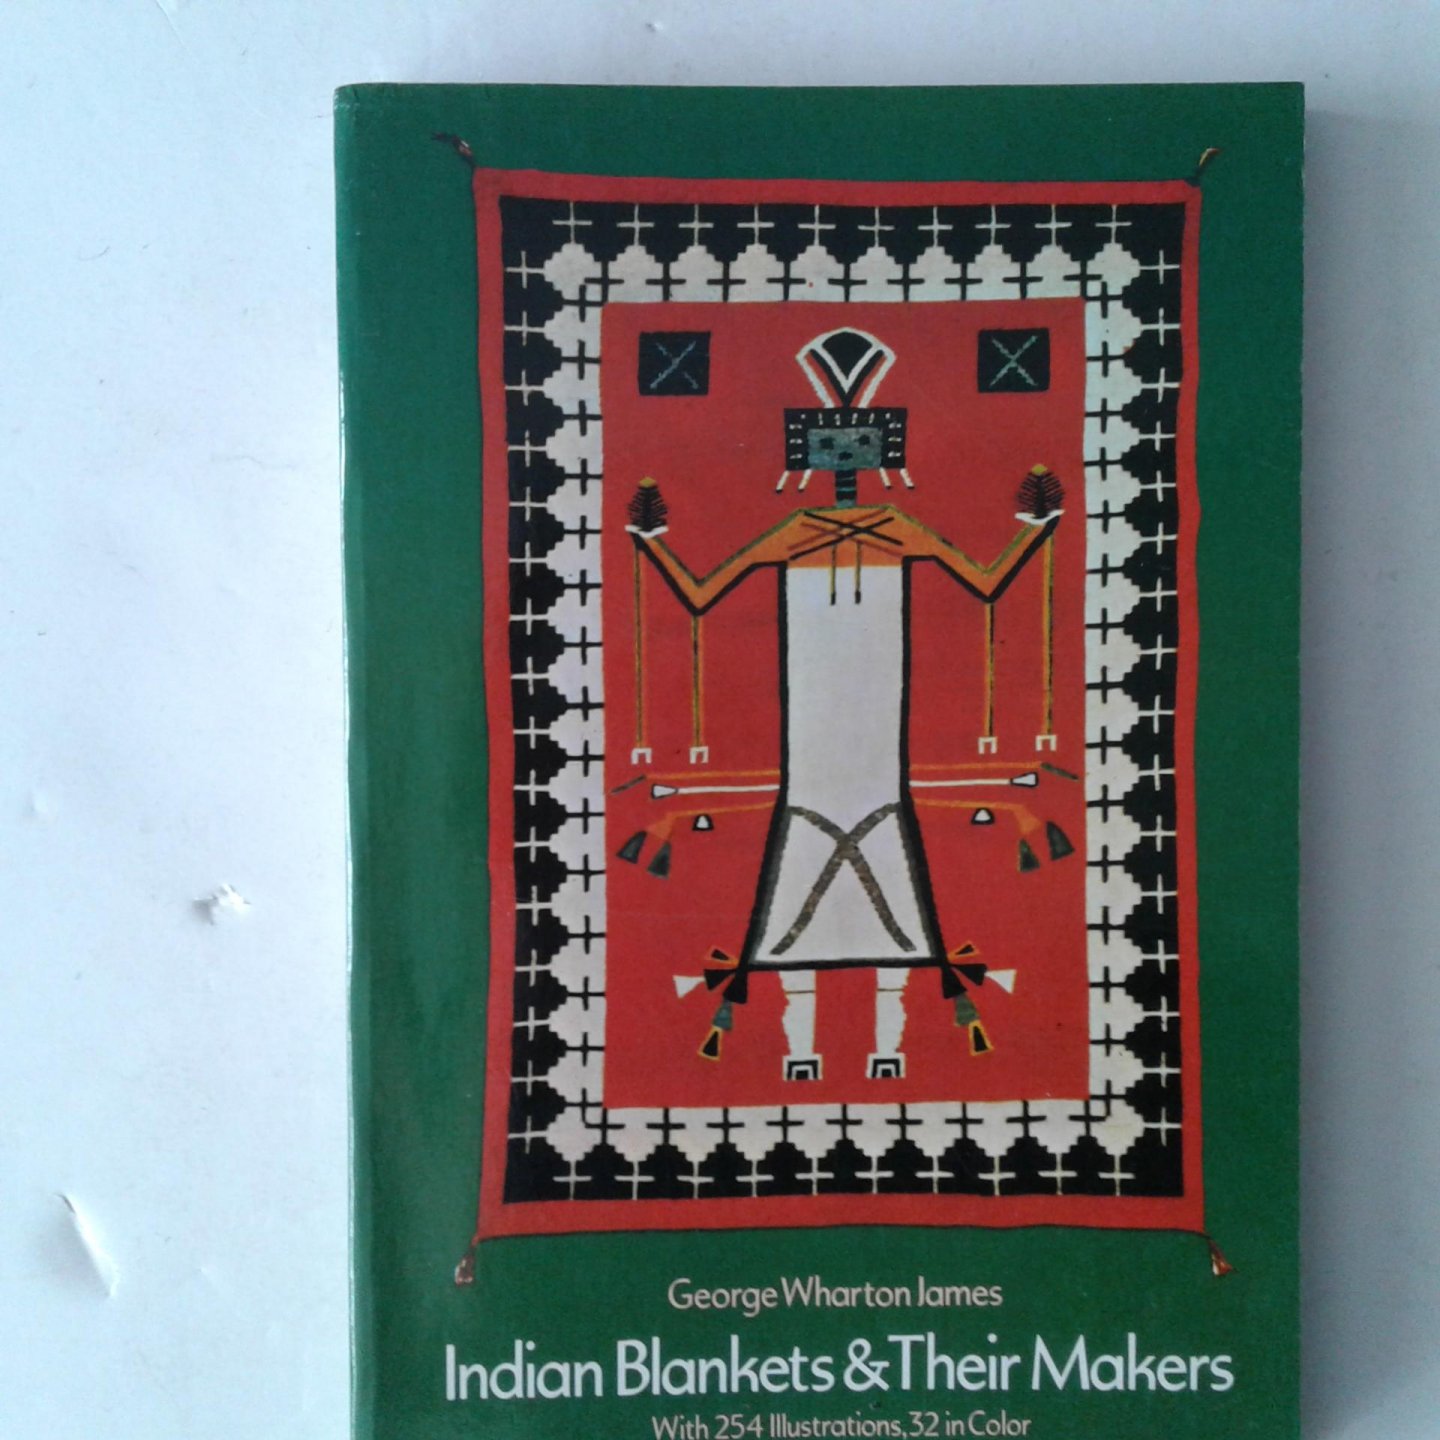 Lames, George Wharton - Indian Blankets & Their Makers